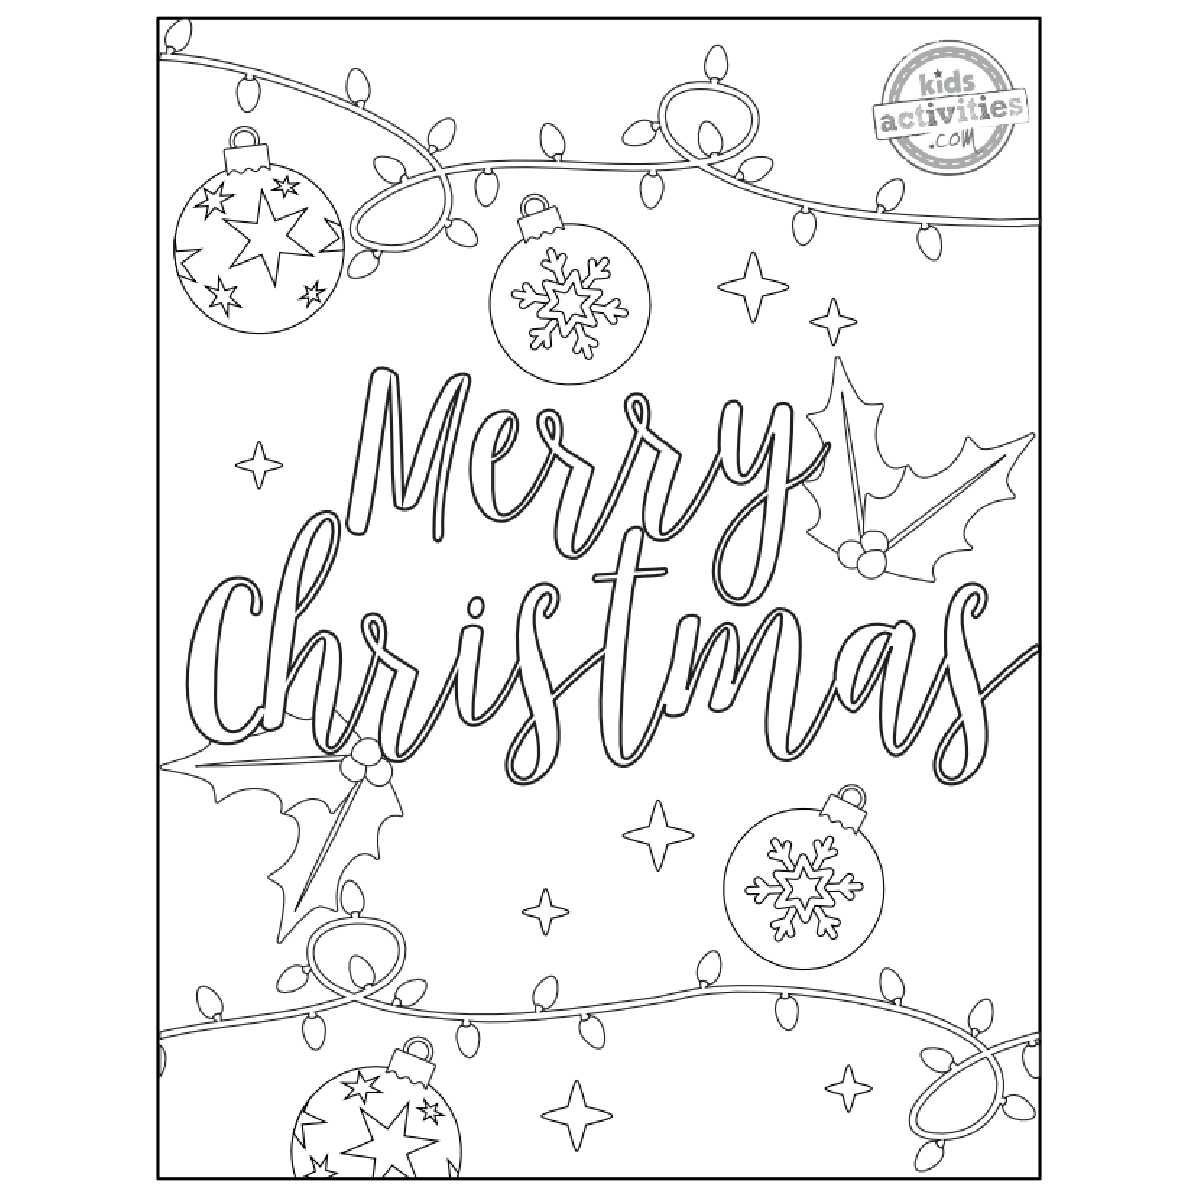 These free merry christmas coloring pages are just too cute kids activities blog